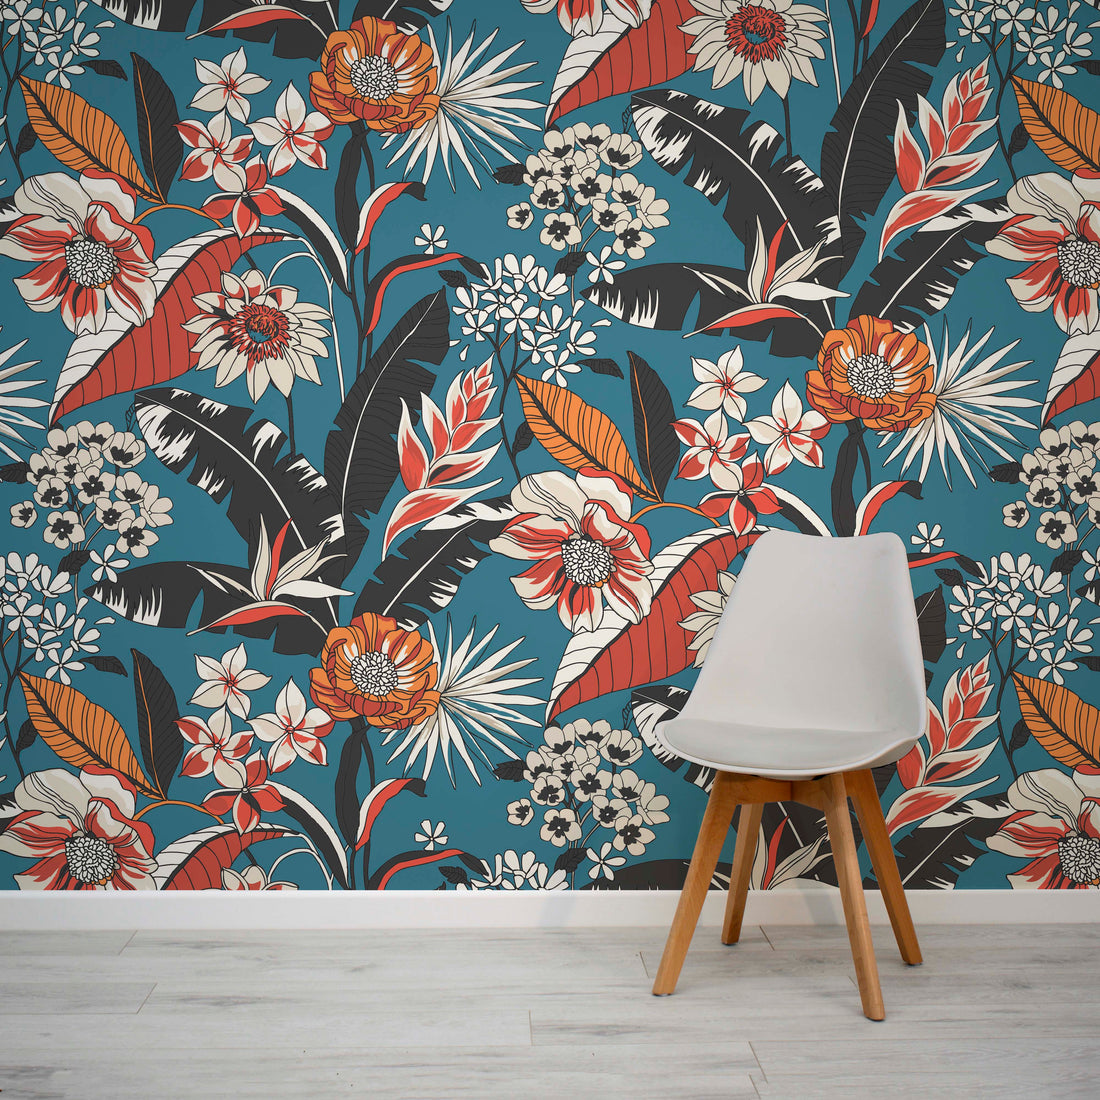 Eclectic mural with bright blue red and orange flowers by WallpaperMural